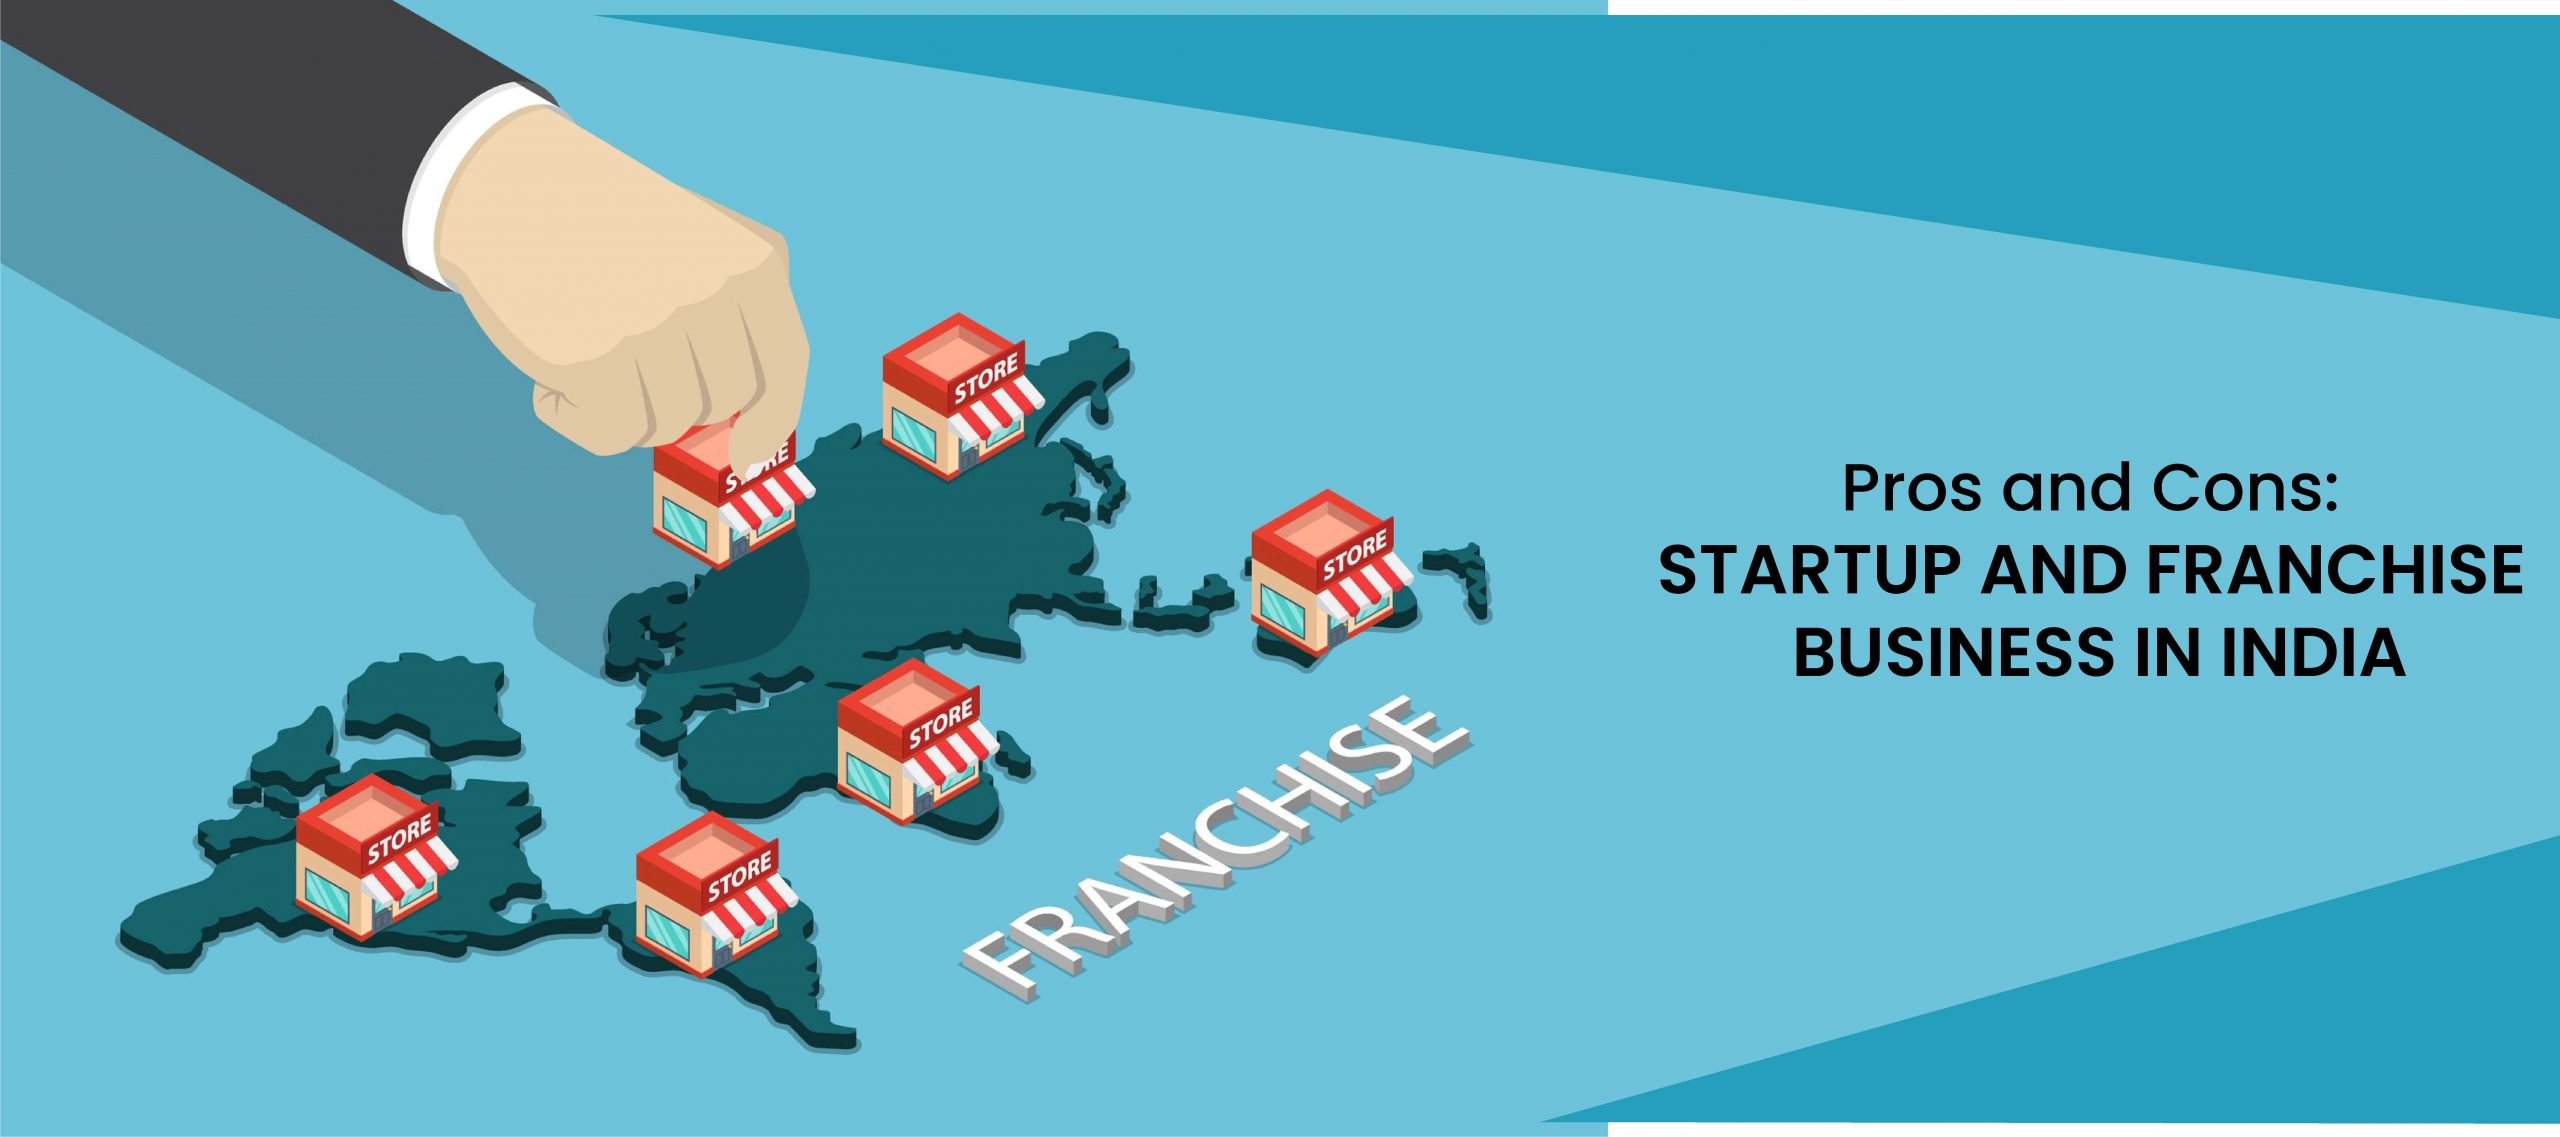 Pros and Cons: Startup and Franchise business in India